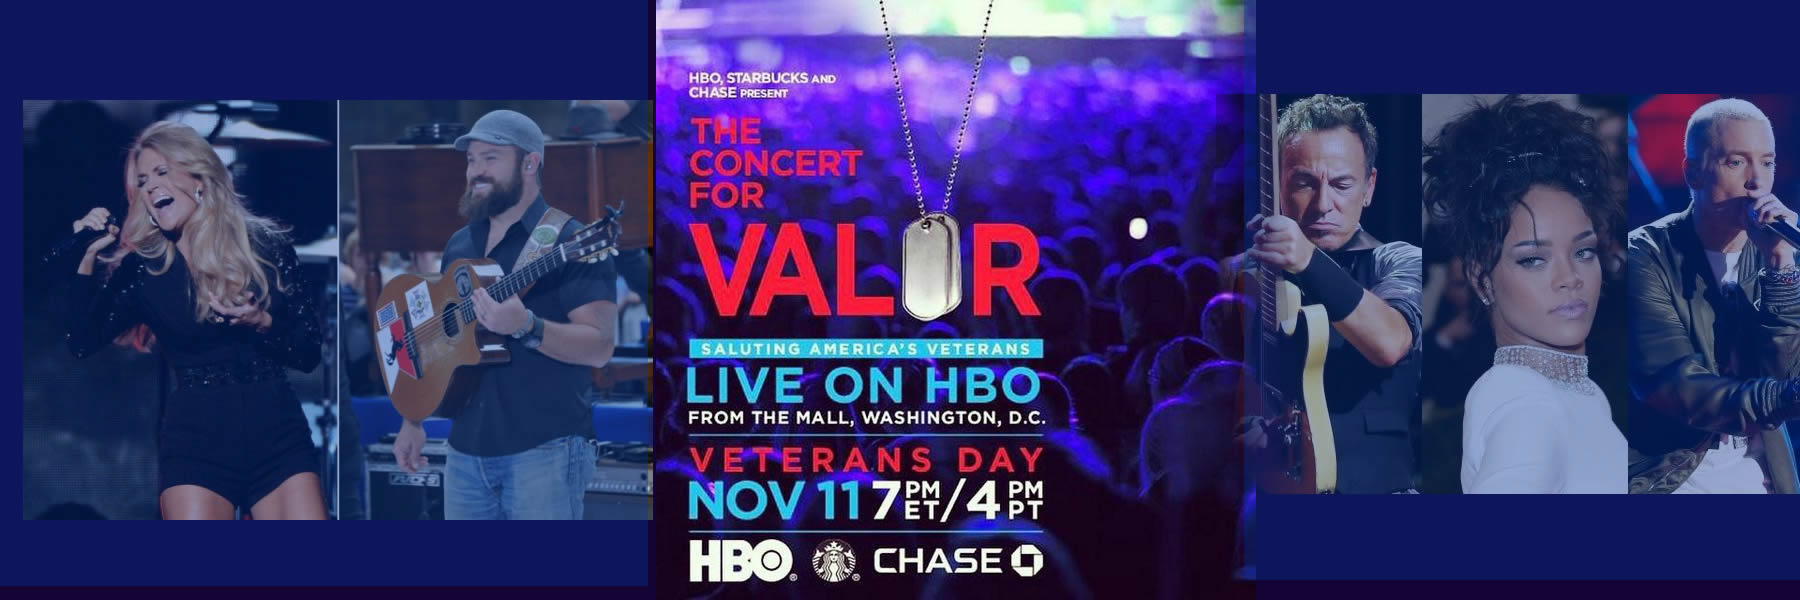 The Concert For Valor